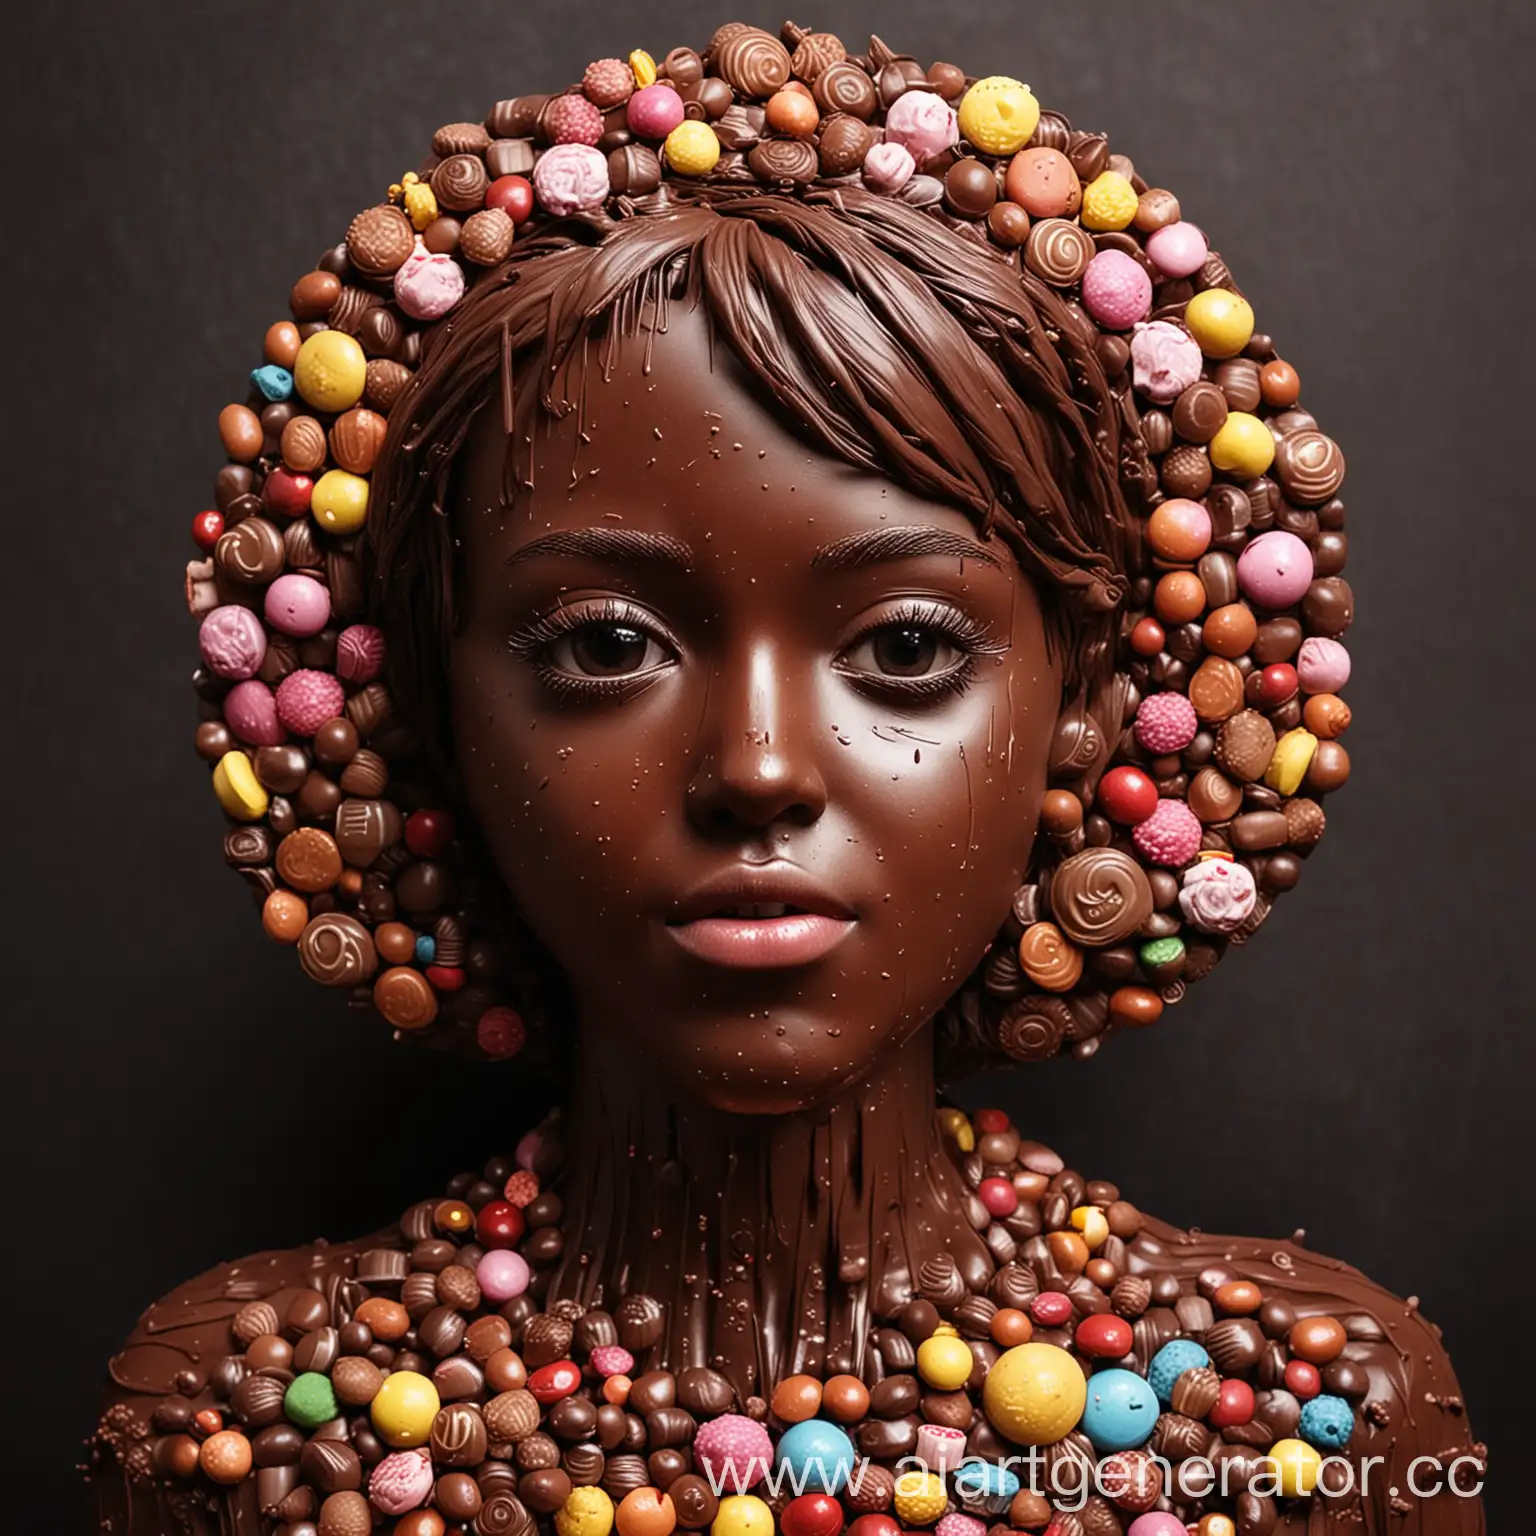 Chocolate-and-Candy-Girl-Sculpture-Whimsical-Confectionery-Art